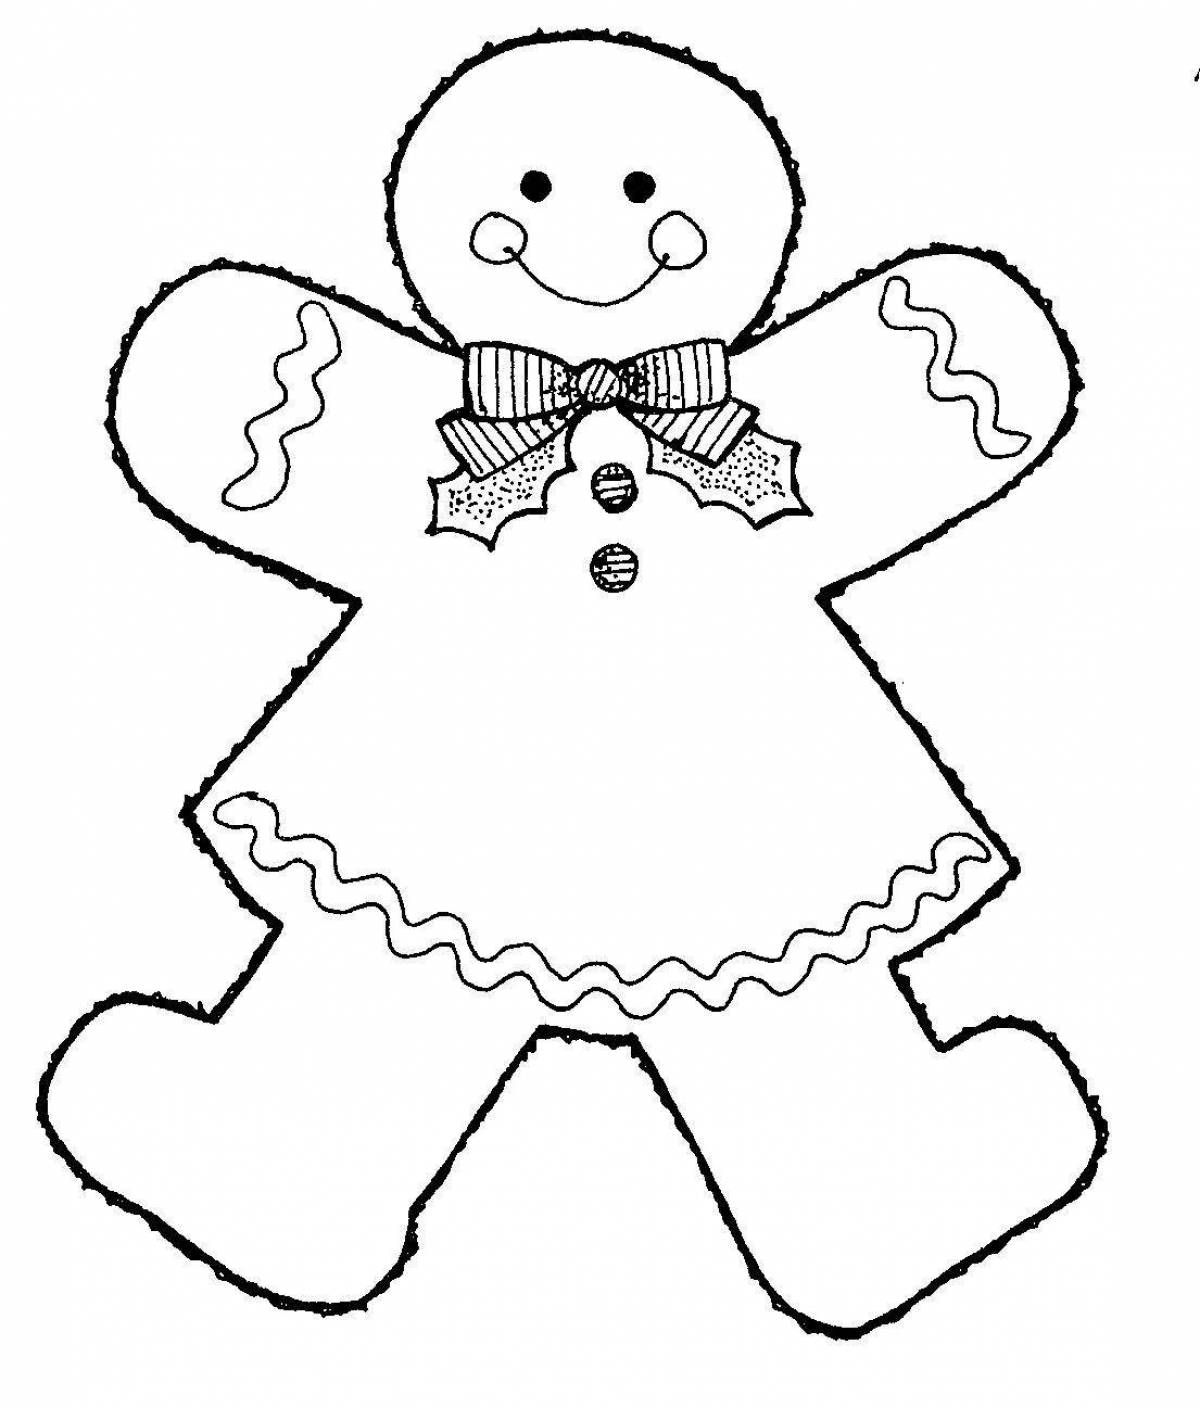 Live gingerbread christmas coloring book